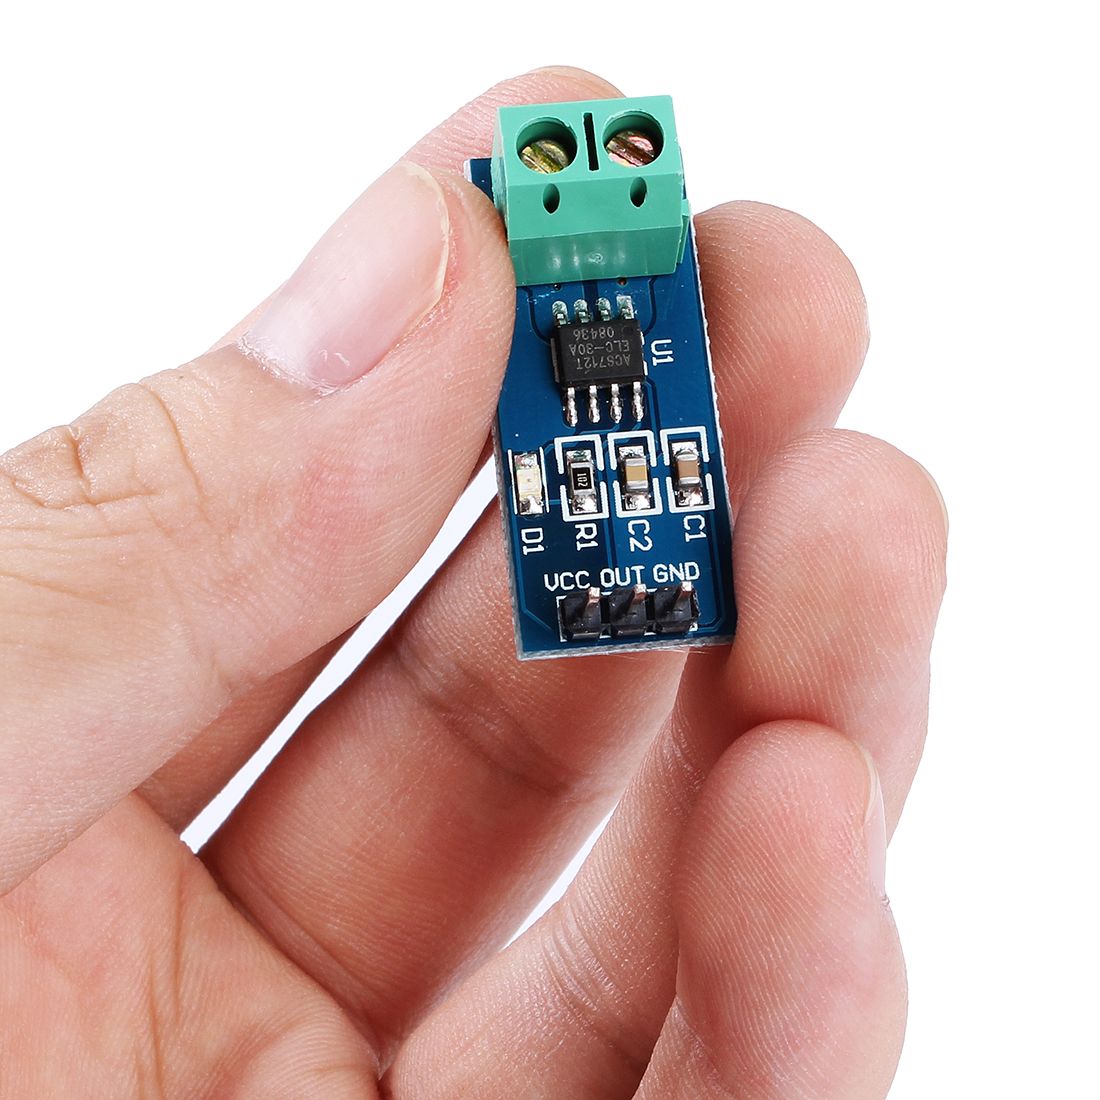 10Pcs-5V-30A-ACS712-Ranging-Current-Sensor-Module-Board-Geekcreit-for-Arduino---products-that-work-w-980104